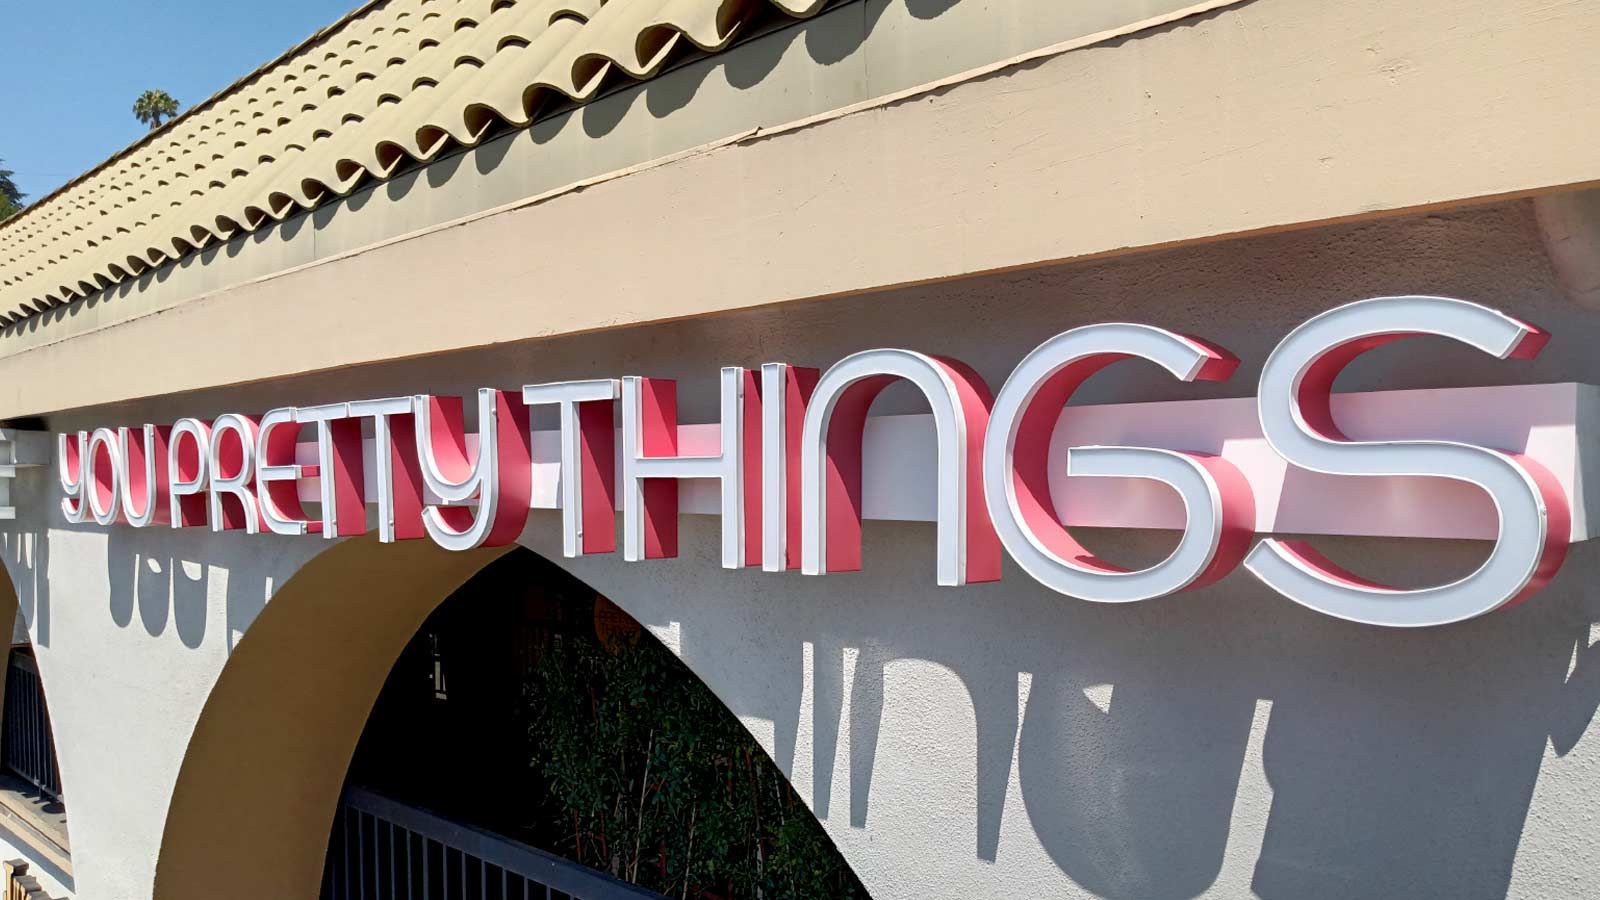 you pretty things outdoor illuminated sign